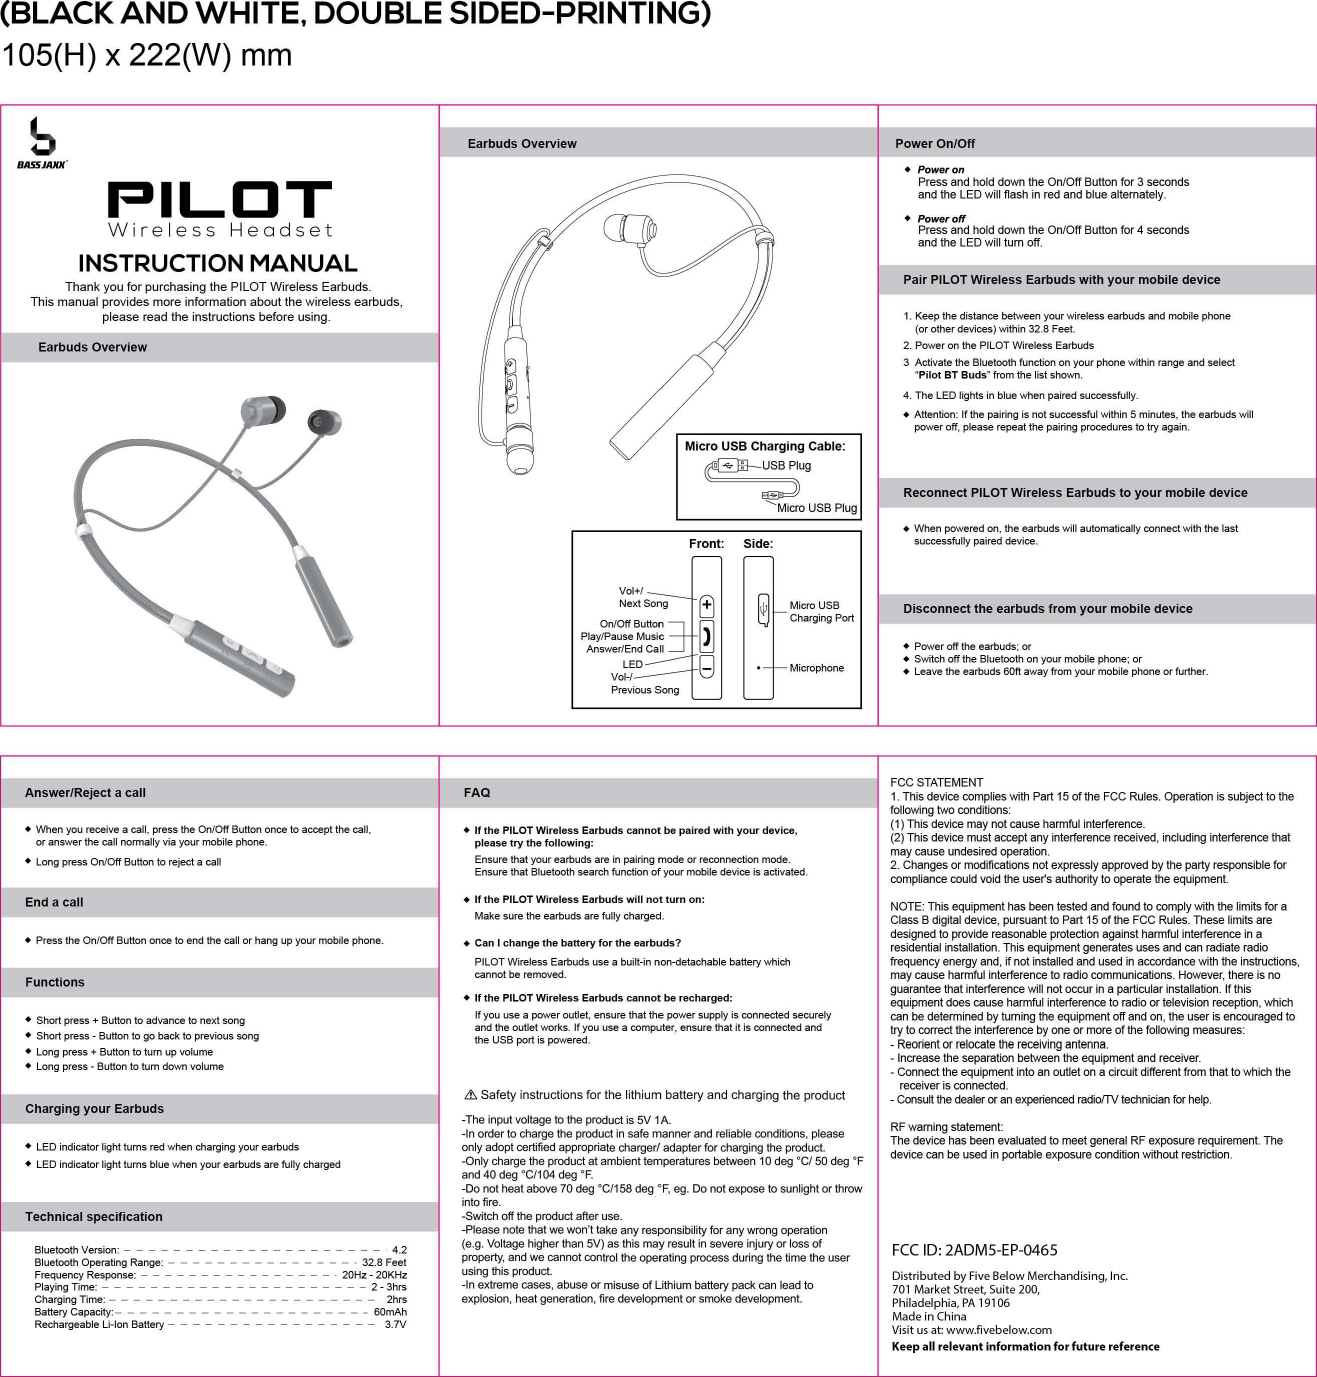 (BLACK AND WHITE, DOUBLE SIDED-PRINTING) 1 05(H) x 222(W) mm PowerOn/Off b Earbuds Overview BASSJAJuf PIL口 TINSTRUCTION MANUAL Thank you for purchasing the PILOT Wireless Earbuds This manual provides more information about the wireless earbuds, please read the instructions before using Earbuds Overview qu u ep acu nMM c-= BZL= rt c M Front: Side: Vol+1 ~II自明白PortNext 50n9 OnlOffButton Play/Pause Music Answer/End Call LE口日I I十M叫Vol-/ Previous 50ng • Poweron Press and hold down the On/Off Butlon for 3 seconds and the LED will f1ash in red and blue alternately • Poweroff Press and hold down the On/Off Butlon for 4 seconds and the LED will turn 。何Pair PILOT Wireless Earbuds with your mobile device 1. Keep the distance between your wireless earbuds and mobile phone (or other devices) within 32.8 Feet 2. Power on the PILOT Wireless Earbuds 3  Activale the Bluetooth function on your phone within range and selecl &quot;Pilot BT Buds&quot; from the list shown 4. The LED lights in blue when paired successfully •  Attention: If the p副ringis not successful within 5 minutes, the ea巾udsw训lpower off, please repeat the  pairing pr，。因duresto try again Disconnect the earbuds from your mobile device Reconnect PILOT Wireless Earbuds to your mobile device • When powered on, the earbuds will automatically connect with the last successfully paired  device • Power off the earbuds; or • Switch。仔theBluetooth on your mobile phone; or • Leave the earbuds 60ft away from your m。国lephone or further FCC STATEMENT Answer/Reject a call FAQ 1. This device complies with Part 15 ofthe FCC Rules. Operation is su叫ectto the following two conditions • When you receive a call, press the On/Off Button once to ac田ptthe臼11，•  If the PILOT Wireless Earbuds cannot be paired with your device,  (1) This device may not cause hannful interference (2) This device must accept any interference received, including interference that 。ranswer the call normally via your mobile phone please try the folJowing  may cause undesired叩eration•  Long press OnlOff Button to reject a臼11Ensure that your earbuds are in pairing mode or reconnection mode 2. Changes or modifications not expressly approved by the pa此yresponsible for Ensure that Bluetooth search fundion of your mobile device is activated compliance∞uld void the user&apos;s authority to ope旧tethe equipment End a call • If the PILOT Wireless Earbuds will not turn on  NOTE: This equipment has been tested and found to comply with the limits for a Make sure the earbuds are fully charged C国ssB digital device，阴阳uantto Part 15 of the FCC Rules. These limits are designed to provide reasonable protection against hannful interference in a •  Press the On/Off Button once to end the call or hang up your mobile phone  •  Can 1 change the battery for the earbuds?  residential installation. This equipment generates uses and can rad旧teradio PILOT Wireless Ea巾udsuse a built-in non-detachable battery which frequency energy and, if not installed and used in accordance with the instruct旧n s，臼nnotbe removed may cause harmful interference to radio communications. However, there is no Functions guarantee that interference will not occur in a pa而cularinstallation. If this • If the PILOT Wireless Earbuds cannot be recharged:  equipment does cause harmful interference to radio or television re四ption，which If you use a power outlet, ensure that the power supply is connected securely  can be determined by turning the equipment 0肝andon, the user is encouraged to •  Short press + Button to advance to next song and the outlet works. If you use a ∞mputer， ensure that it is connected and 的tocorrect the interference by one or more of the following measures •  Short press -Button to go back to previous song the USB port is powered  -Reorient or relocate the receiving antenna •  Long press + Button to turn up volume  Increase the separation between the equipment and rec创ver•  Long press -Button to turn down volume  -Connect the equipment into an outlet on a circuit different from that to which the receiver is connected .&amp; Safety instructions for the lithium batte叩andcharging the product Consult the dealer町anexpenen由dradiofTV technidan for help Charging your Earbuds The input voltage to the product is 5V 1A  RF waming statement -In order to charge the product in safe manner and reliable∞nditions， please  The device has been evaluated to meet general RF exposure requirement. The • LED indicator light turns red when charging your earbuds 。nlyadopt certified appropriate chargerl adapter for charging the  product  device can be used in porta剧eexposure condition without restriction • LED indicator light turns blue when your国rbudsare fully charged  Only charge the product at amb旧时temperaturesbetween 10 deg oC/50 de时9oF and 40 deg oC/l04 deg oF 00 not heat above 70 deg oC/158 deg oF, eg. 00 not expose to sunlight or throw intofire Technical specification Switch off the product after use -Please note that we won&apos;t take any responsibility for any wrong operation Bluetooth Version: --------------------- 4.2  (e.g. Voltage higher than 5V) as this may result in severe inju叩。rlossofFCC ID: 2ADMS-EP-046S Bluetooth Operating Range: ----------------32.8 Feet prope即，andwe臼nnot∞ntrolthe operating process during the time the user Frequency Response:  ----------------. 20Hz -20KHz  using this product Oistributed by Five 8elow Merchandising, Inc Playing Time: - - - - - - - - - - - - - - - - - - - - - - 2 - 3hrs -In extreme臼ses，abuse or misuse of Lithium batte叩packcan lead to  701 Market Street, Suite 200, ChargingTime:---------------------- 2hrs  explosion, heat generation, fire development or smoke development  Philadelphia, PA 19106 Ba忧eryCapacity:---------------------60mAh Made in China Rechargeable Li-Ion Battery  - - - - - - - - - - - - - - - - - 3.7V  Visit us at: www.fivebelow.com Keep all relevant information for future reference 